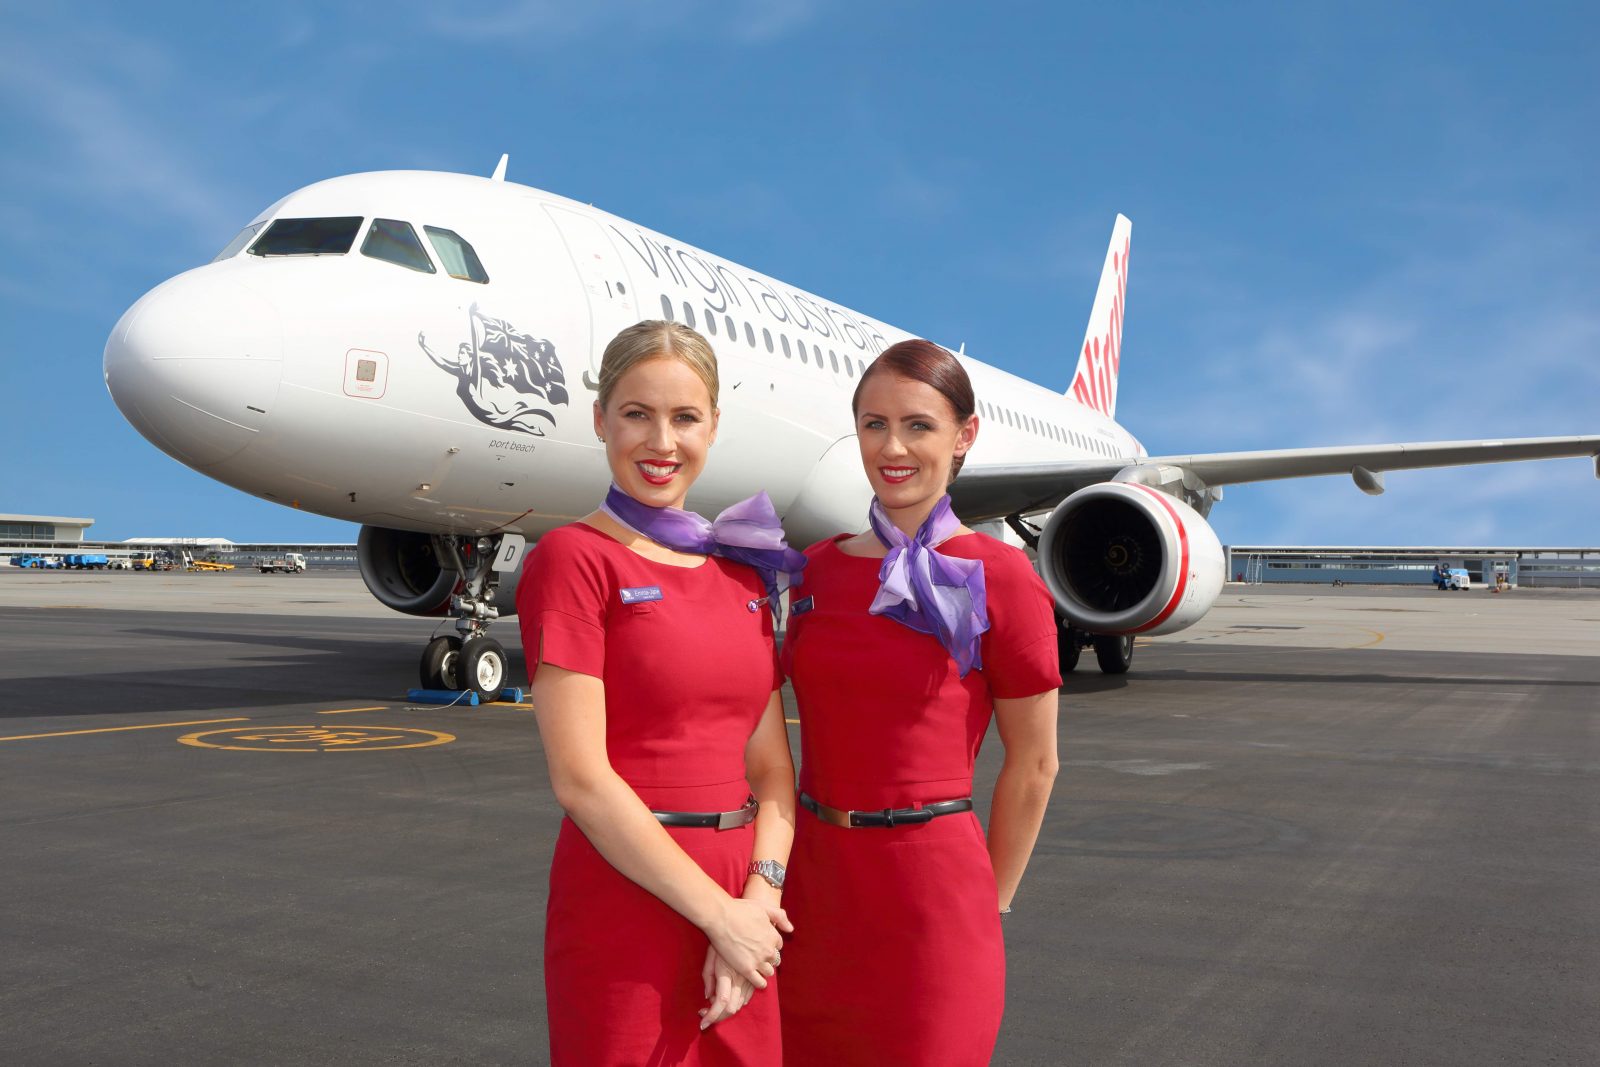 As Virgin Australia short haul cabin crew you'll be operating on the airline's fleet of A320 aircraft. Photo Credit: Virgin Australia